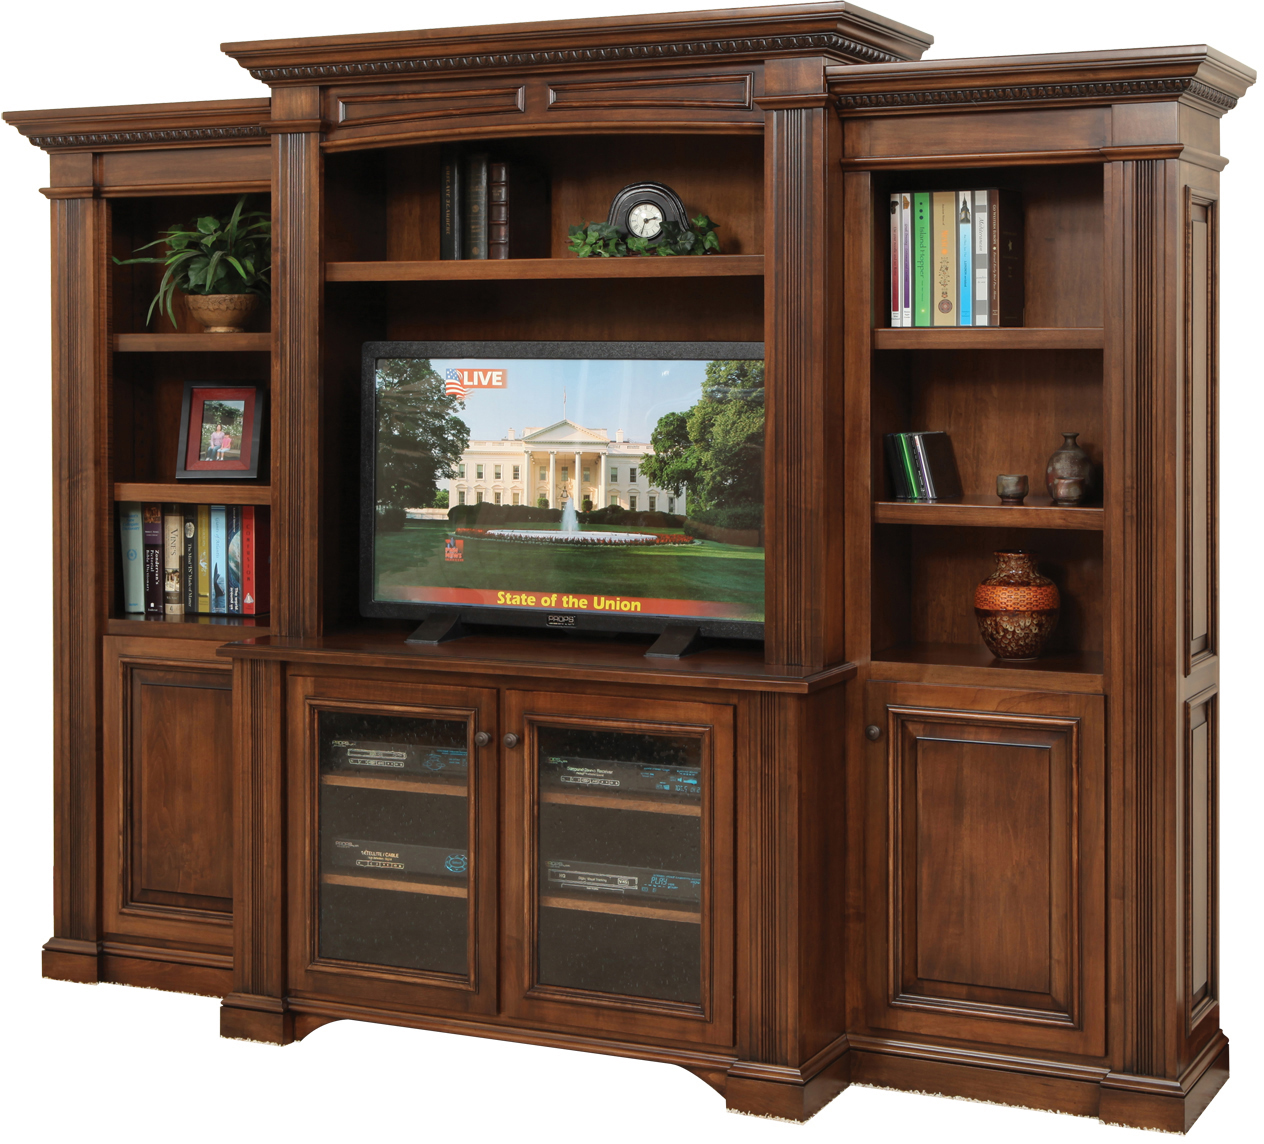 Solid-Wood Entertainment Furniture